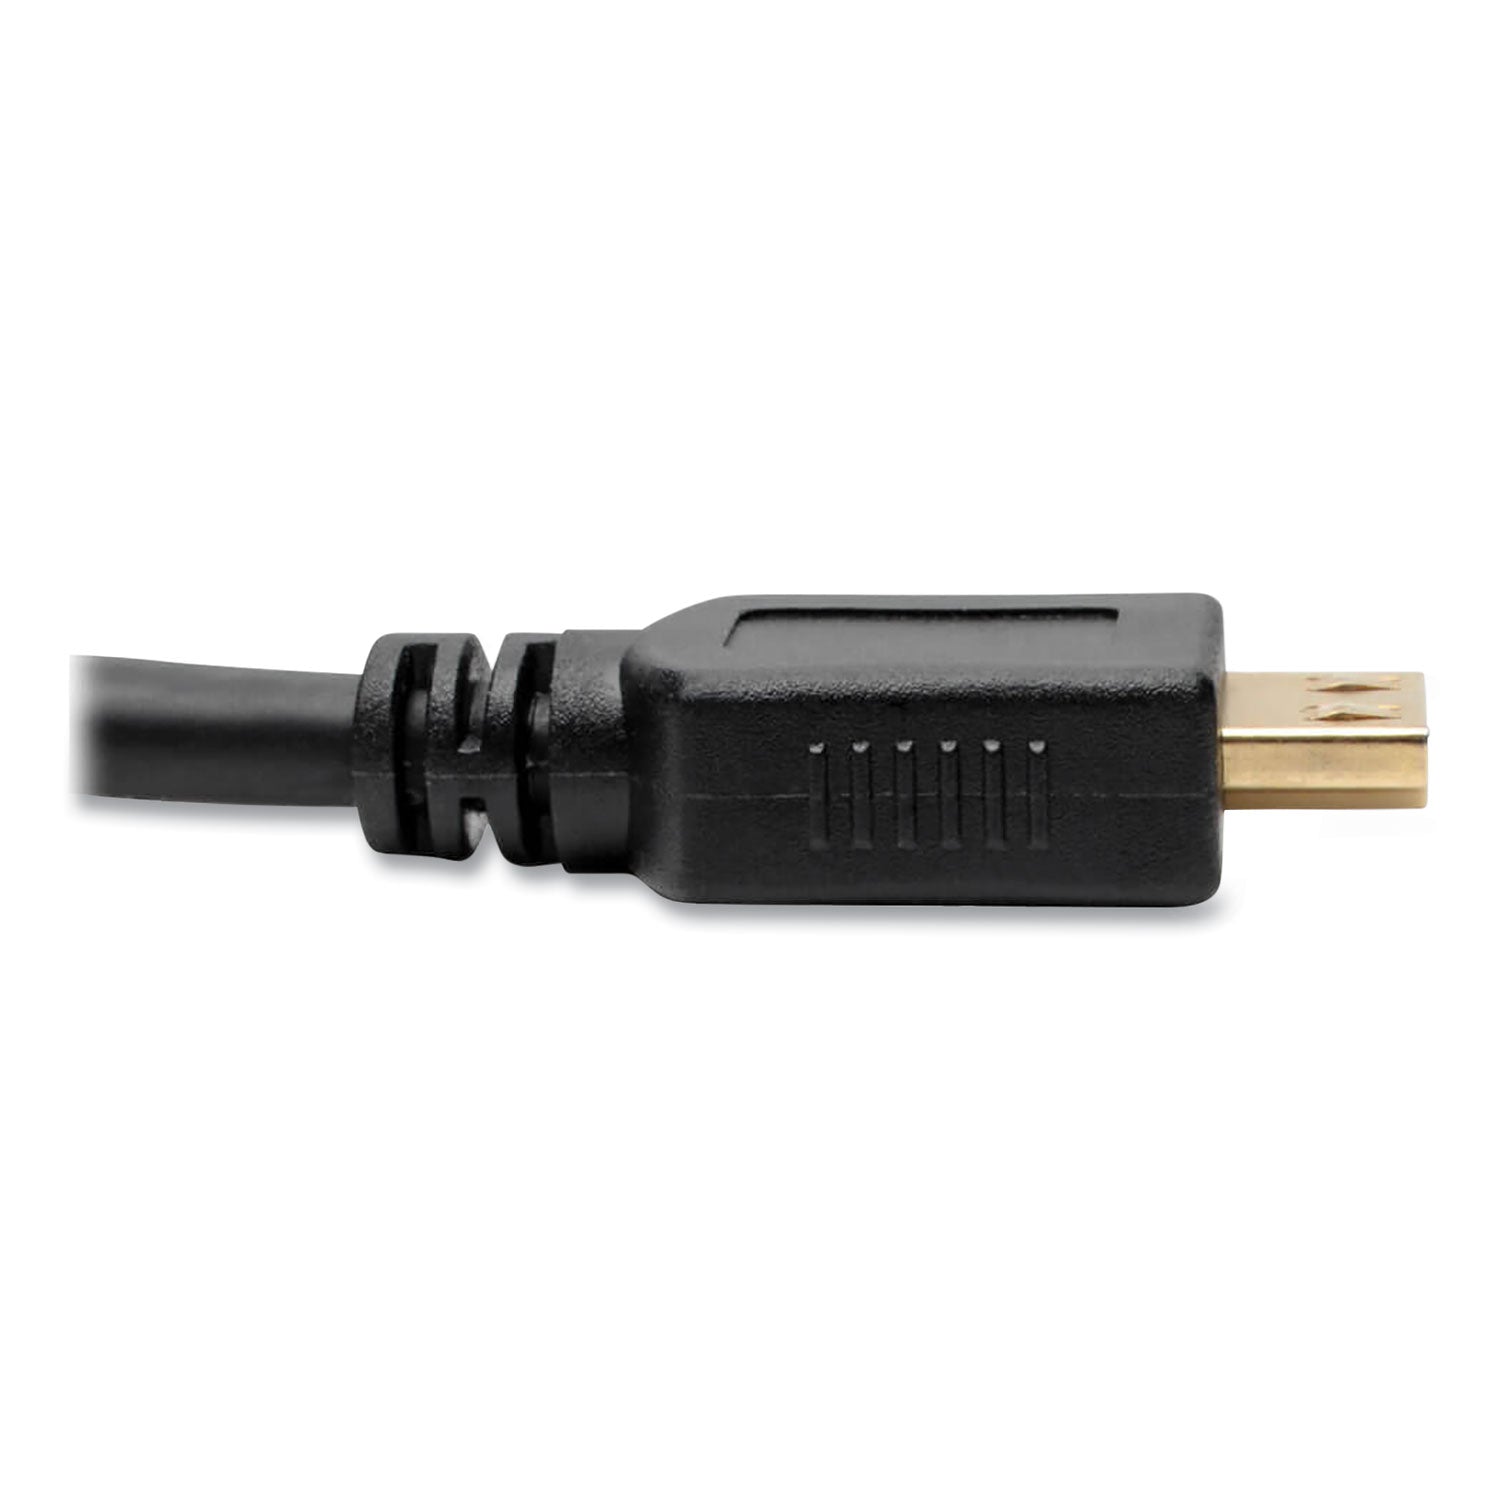 hdmi-to-vga-with-audio-converter-cable-6-black_trpp13106n - 8